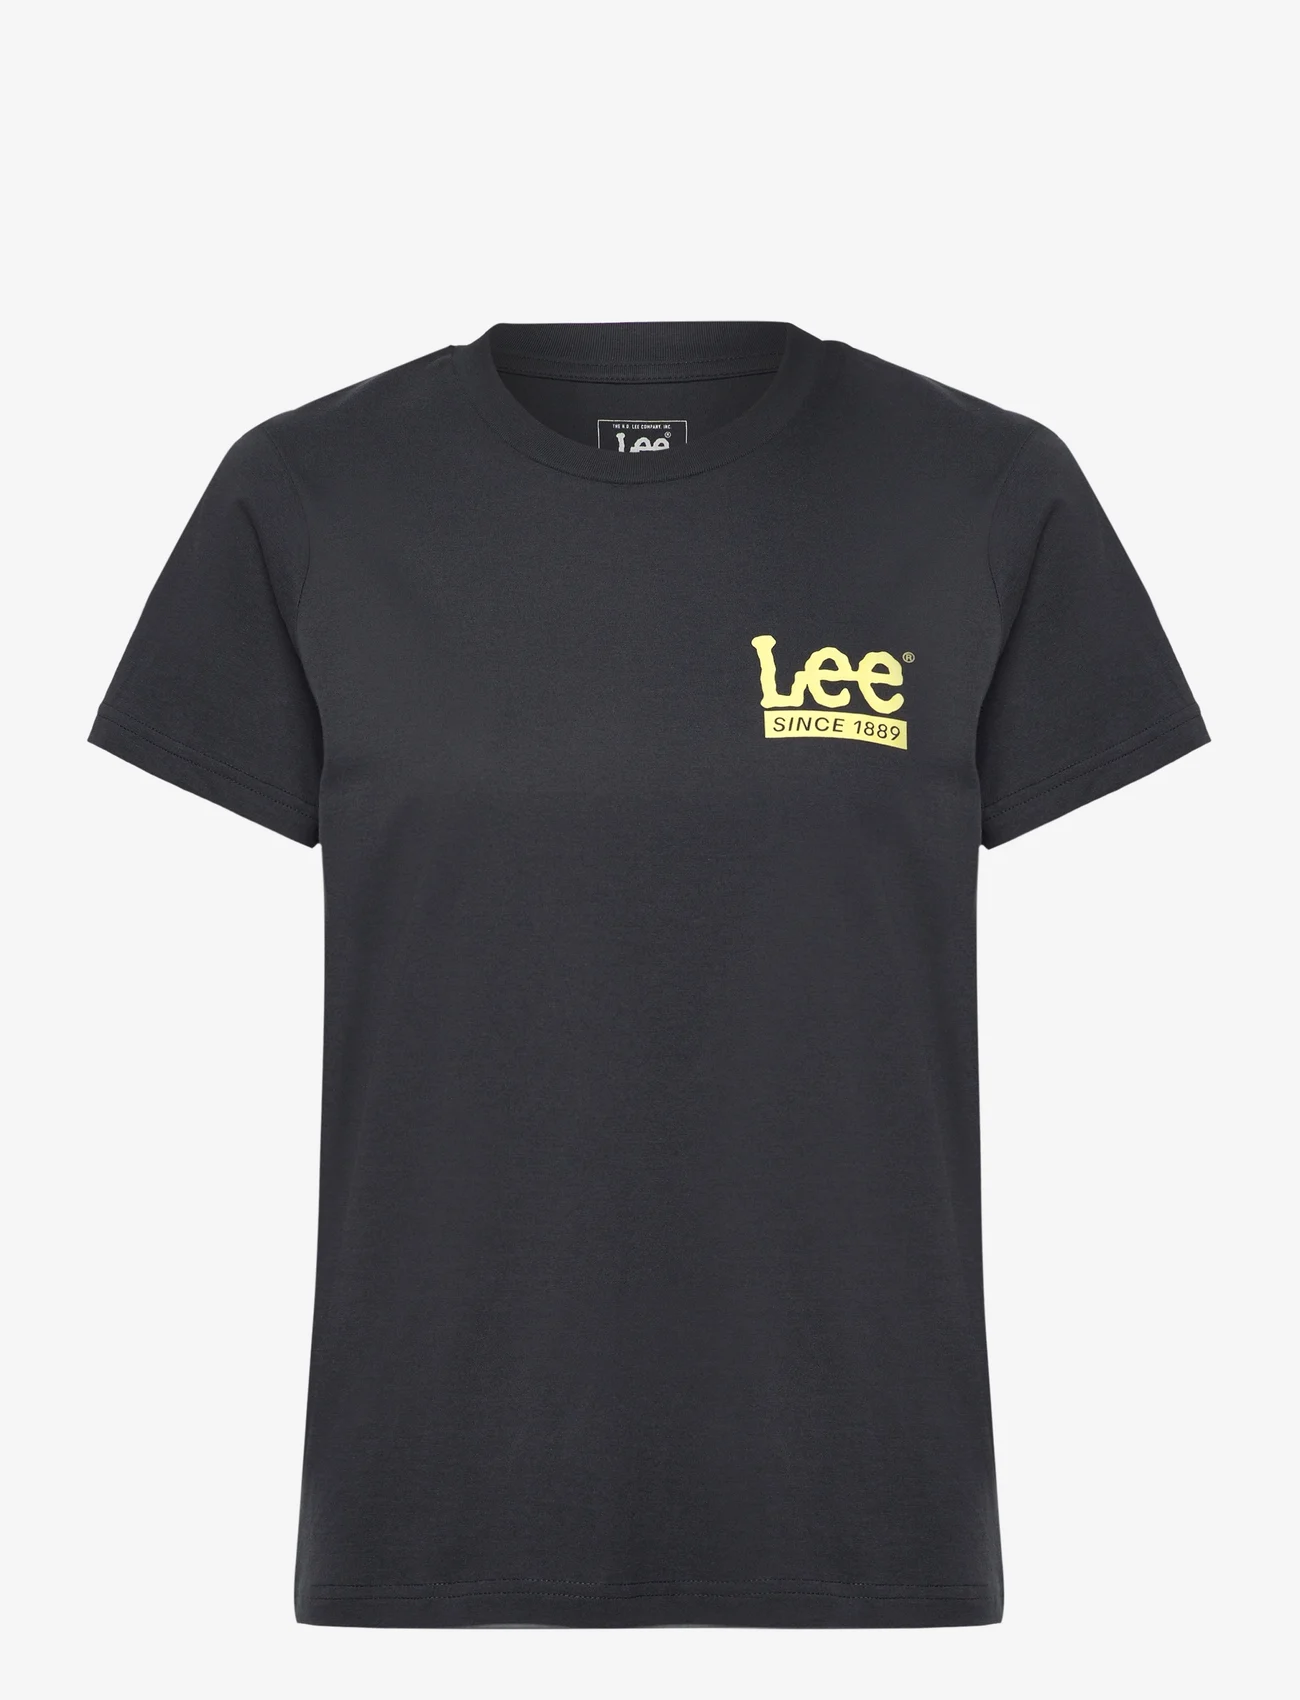 Lee Jeans - SMALL LEE TEE - lowest prices - charcoal - 0